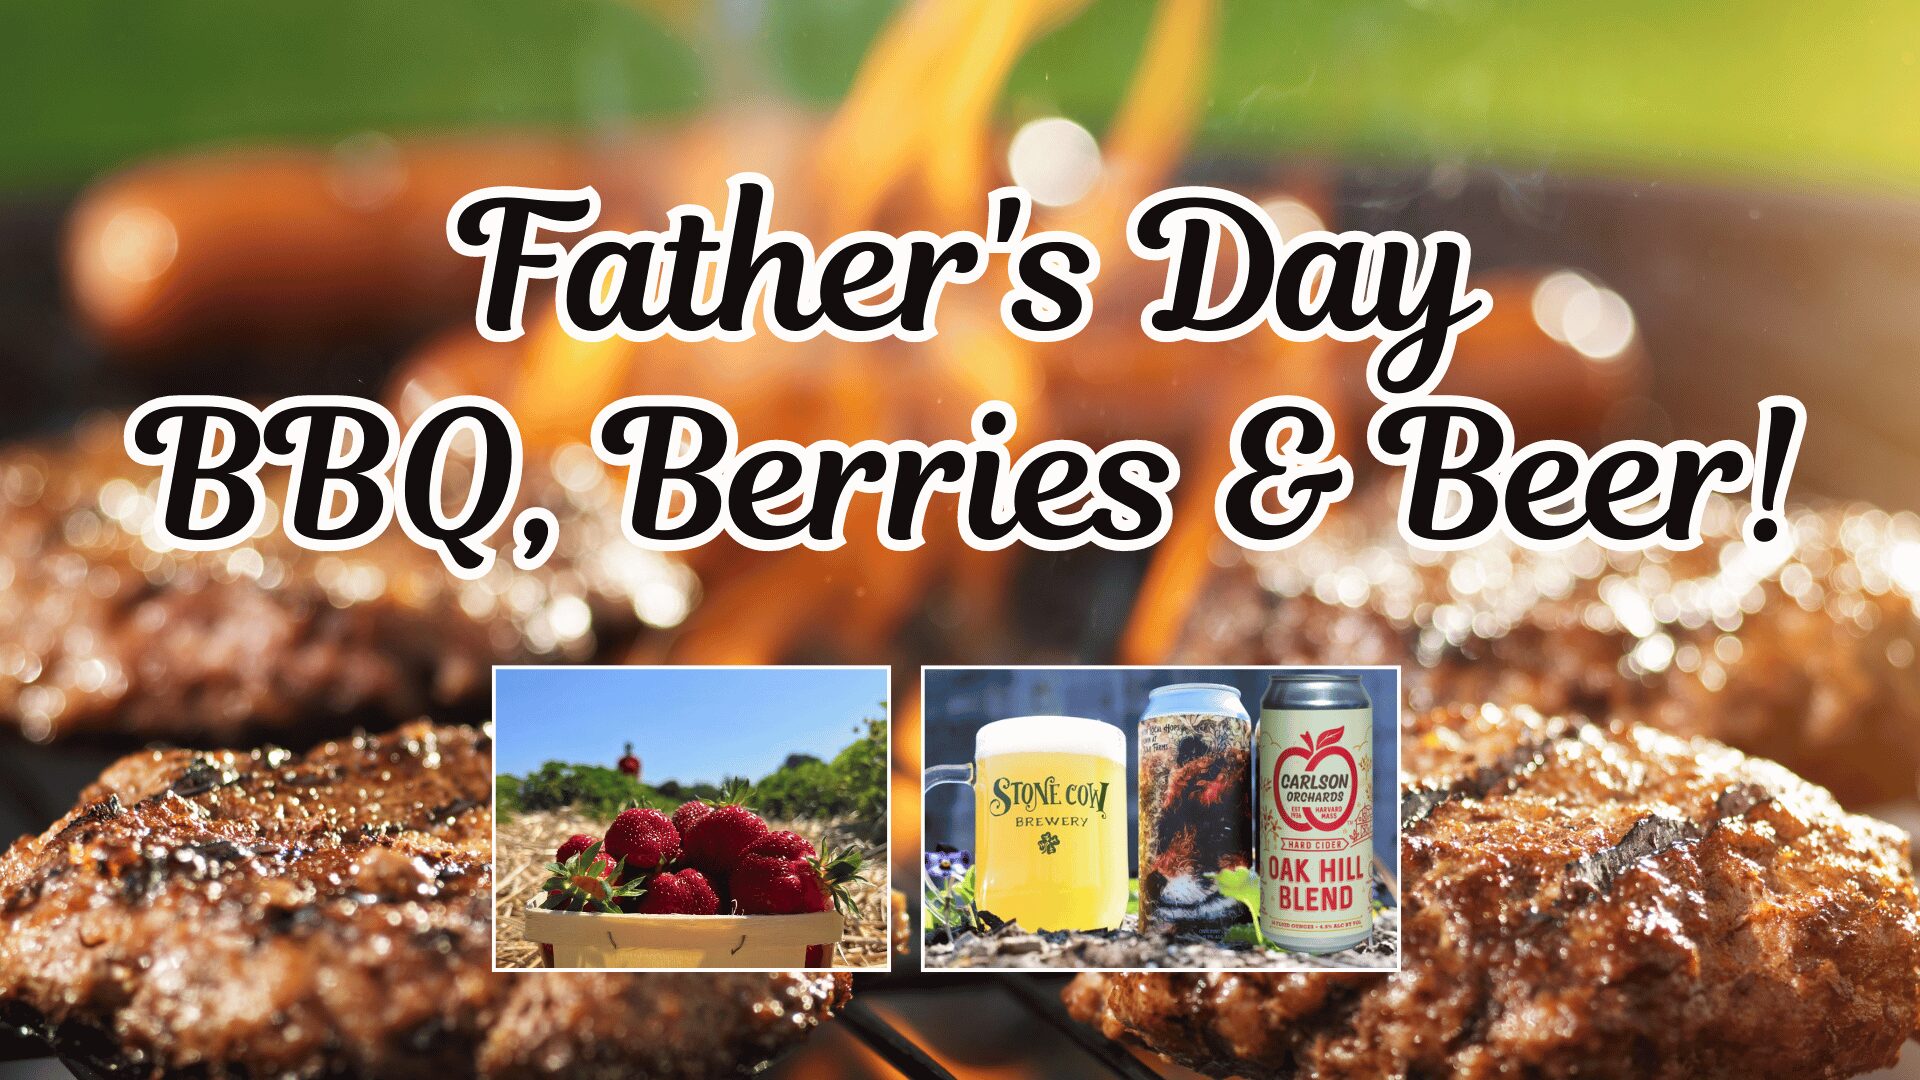 Open Father's Day weekend for Grill & Beer Garden